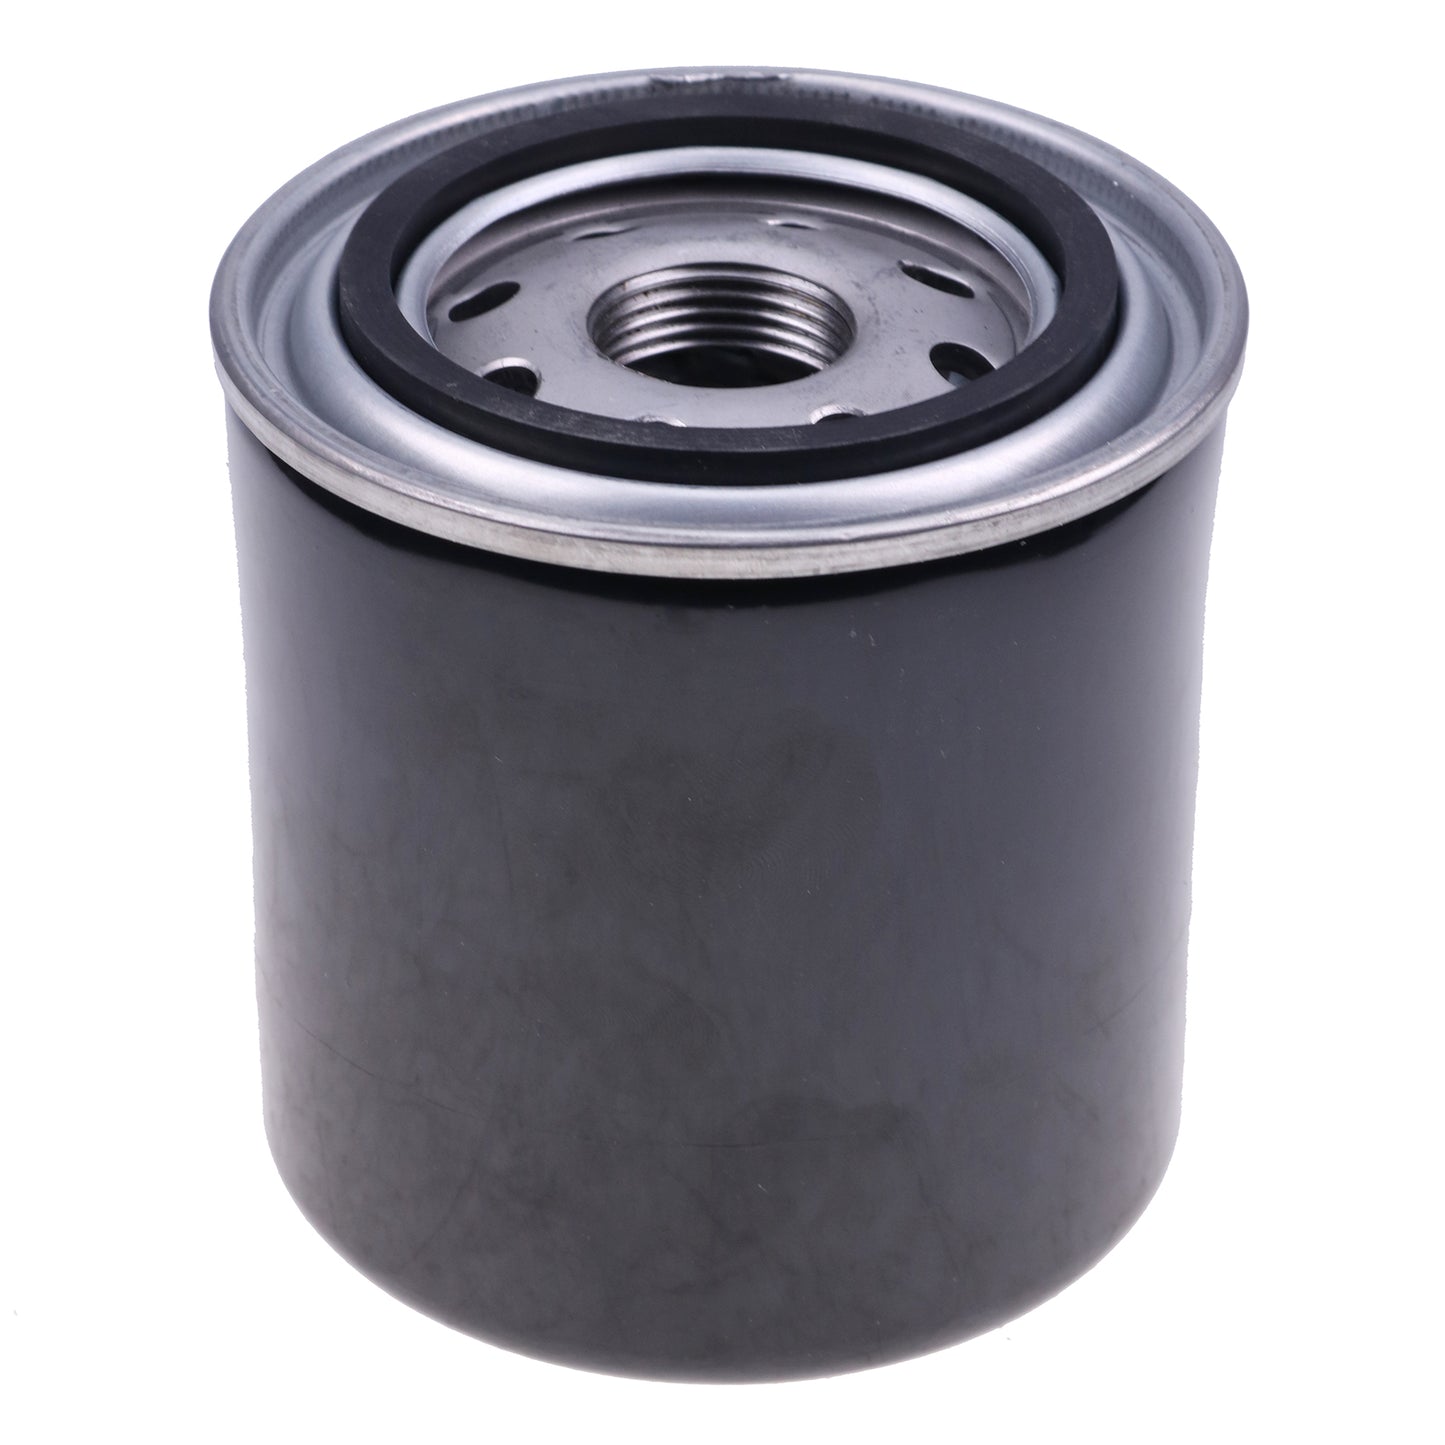 New LVA12812 Hydraulic Oil Filter Compatible with John Deere Compact Utility Tractors 2305 2210 Series